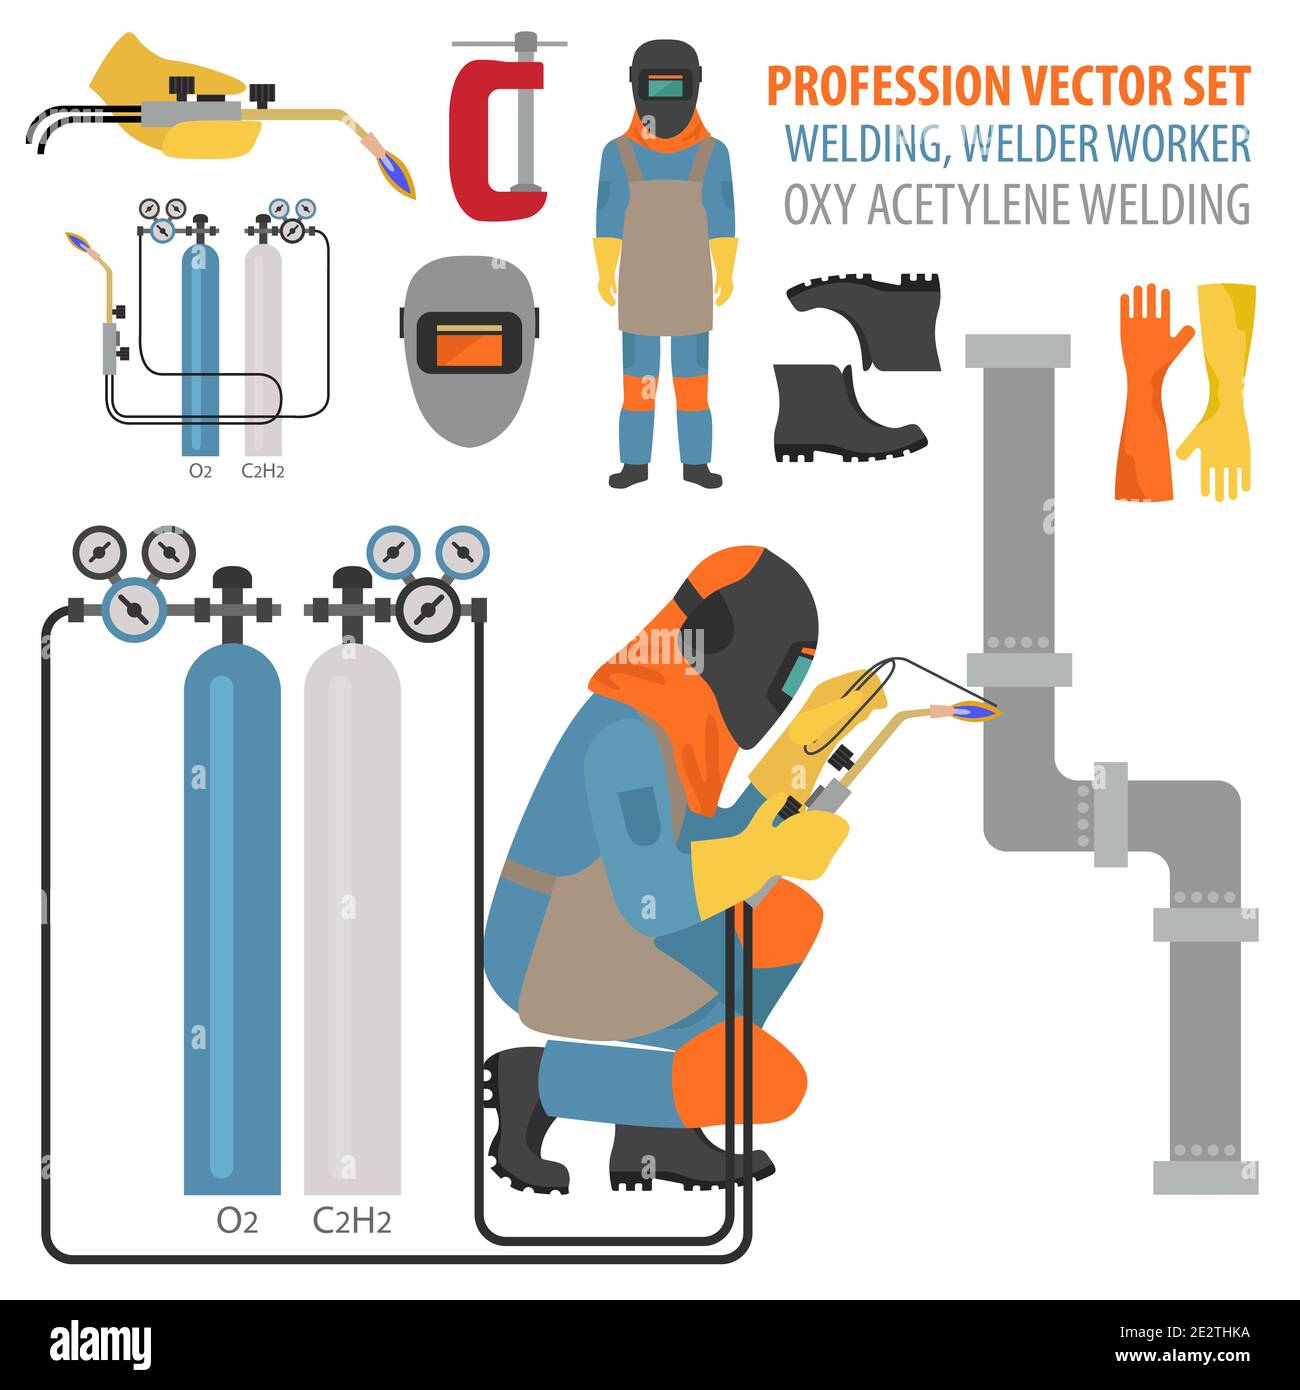 Profession and occupation set. Metal welding equipment, gas cutting flat design icon.Welder worker. Vector illustration Stock Vector